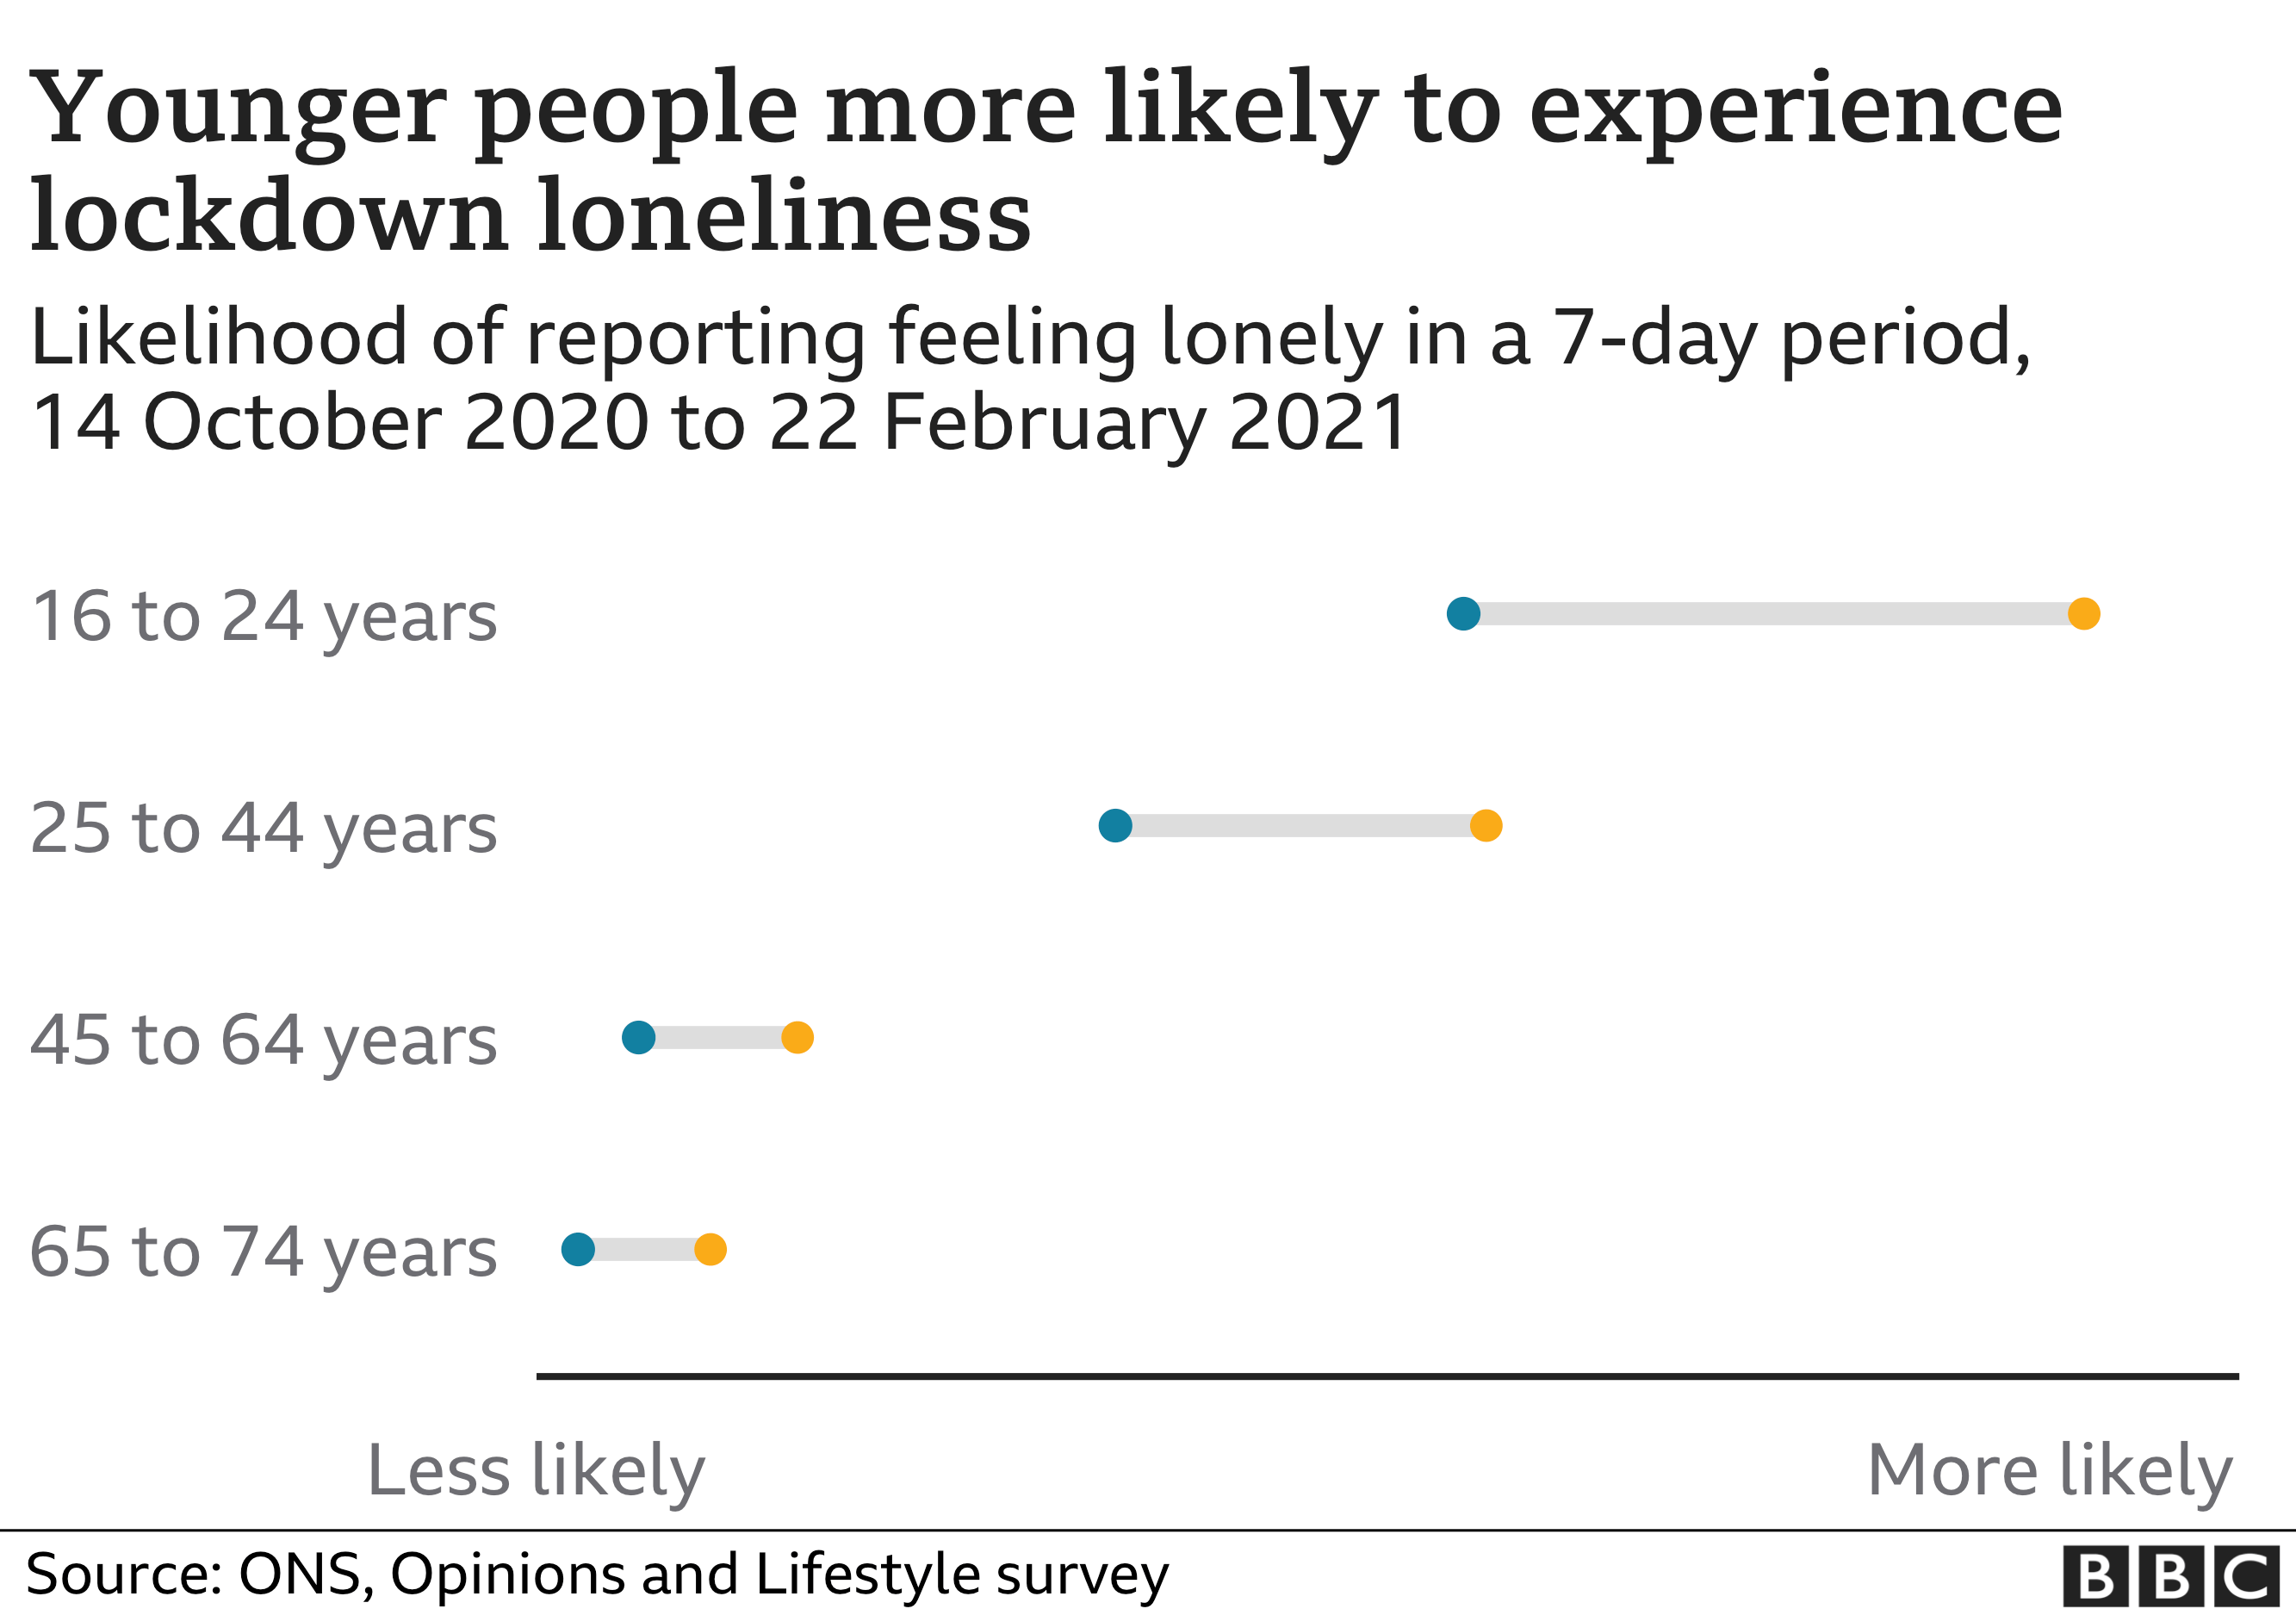 Chart shows younger people more likely to experience lockdown loneliness